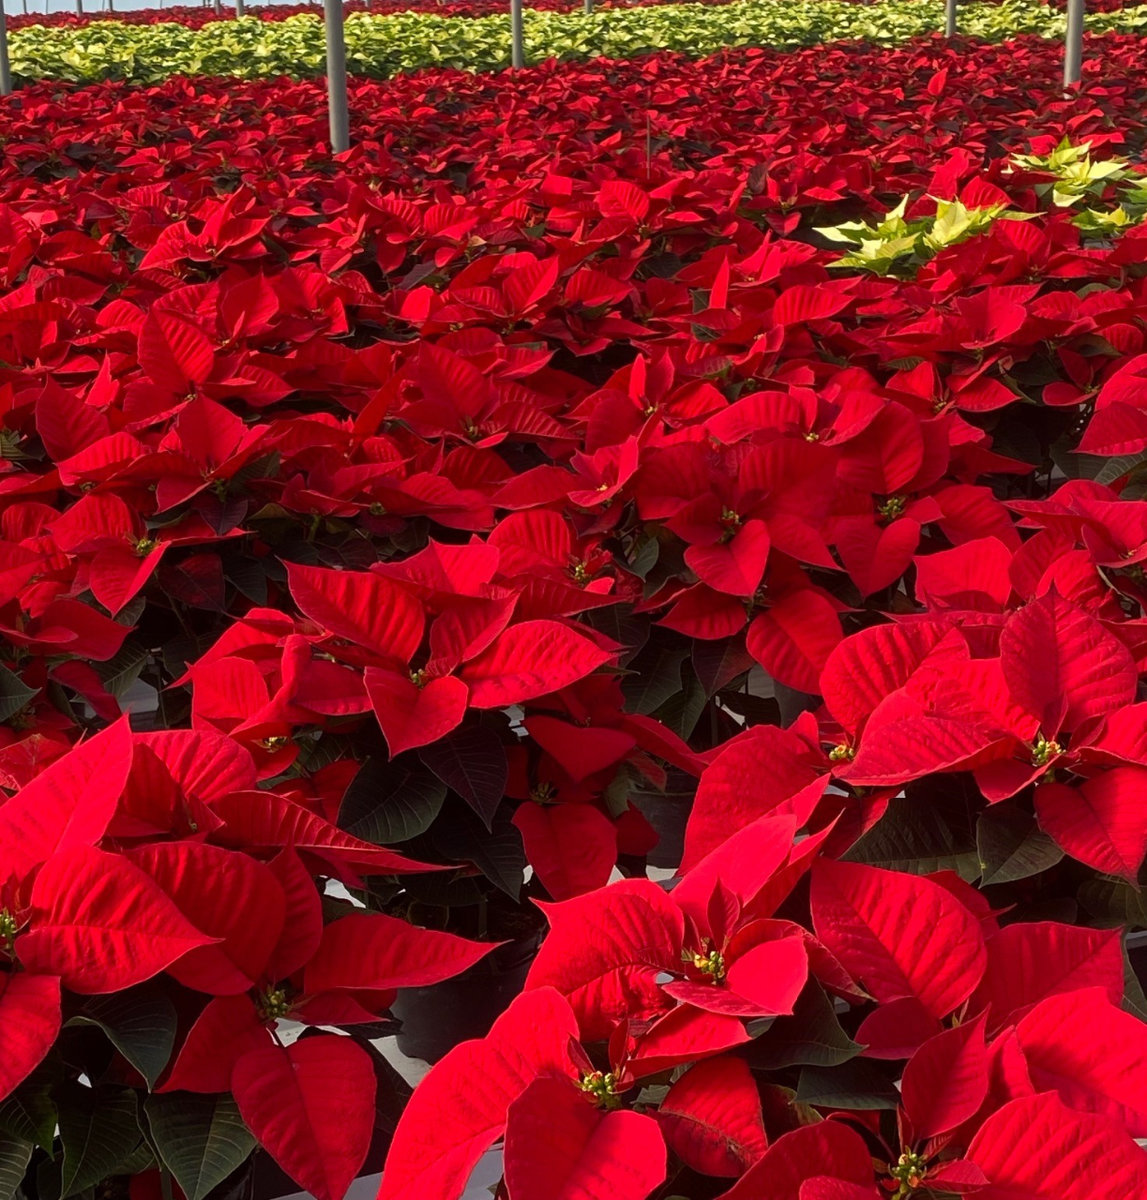 Poinsettia fundraiser with red and white poinsettias in greenhouse.